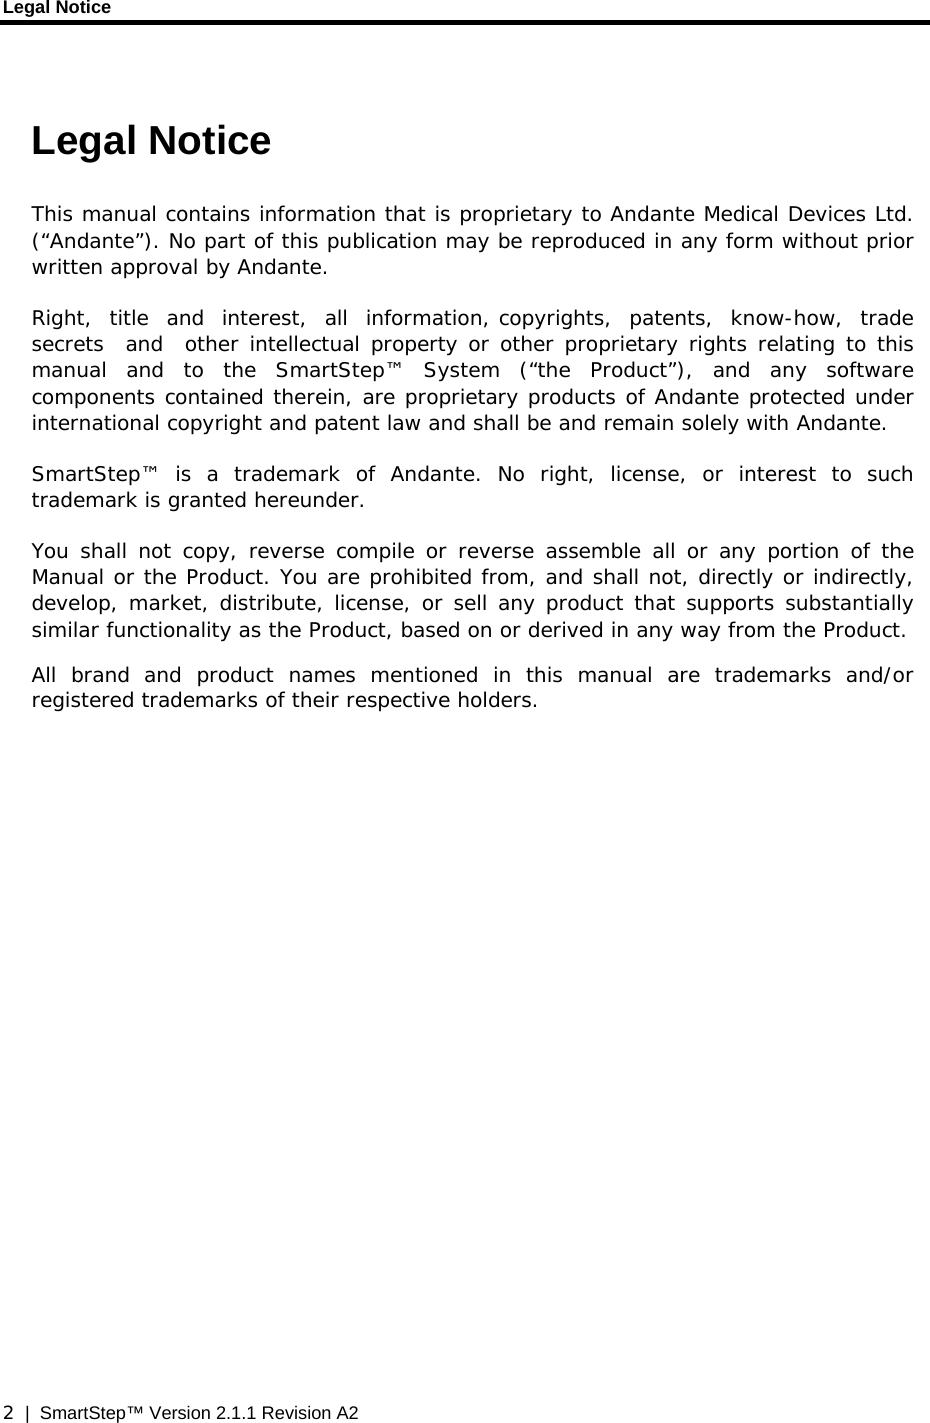 Legal Notice  2  |  SmartStep™ Version 2.1.1 Revision A2  Legal Notice This manual contains information that is proprietary to Andante Medical Devices Ltd. (“Andante”). No part of this publication may be reproduced in any form without prior written approval by Andante. Right,  title  and  interest,  all  information, copyrights,  patents,  know-how,  trade  secrets  and  other intellectual property or other proprietary rights relating to this manual and to the SmartStep™ System (“the Product”), and any software components contained therein, are proprietary products of Andante protected under international copyright and patent law and shall be and remain solely with Andante. SmartStep™ is a trademark of Andante. No right, license, or interest to such trademark is granted hereunder. You shall not copy, reverse compile or reverse assemble all or any portion of the Manual or the Product. You are prohibited from, and shall not, directly or indirectly, develop, market, distribute, license, or sell any product that supports substantially similar functionality as the Product, based on or derived in any way from the Product.  All brand and product names mentioned in this manual are trademarks and/or registered trademarks of their respective holders. 